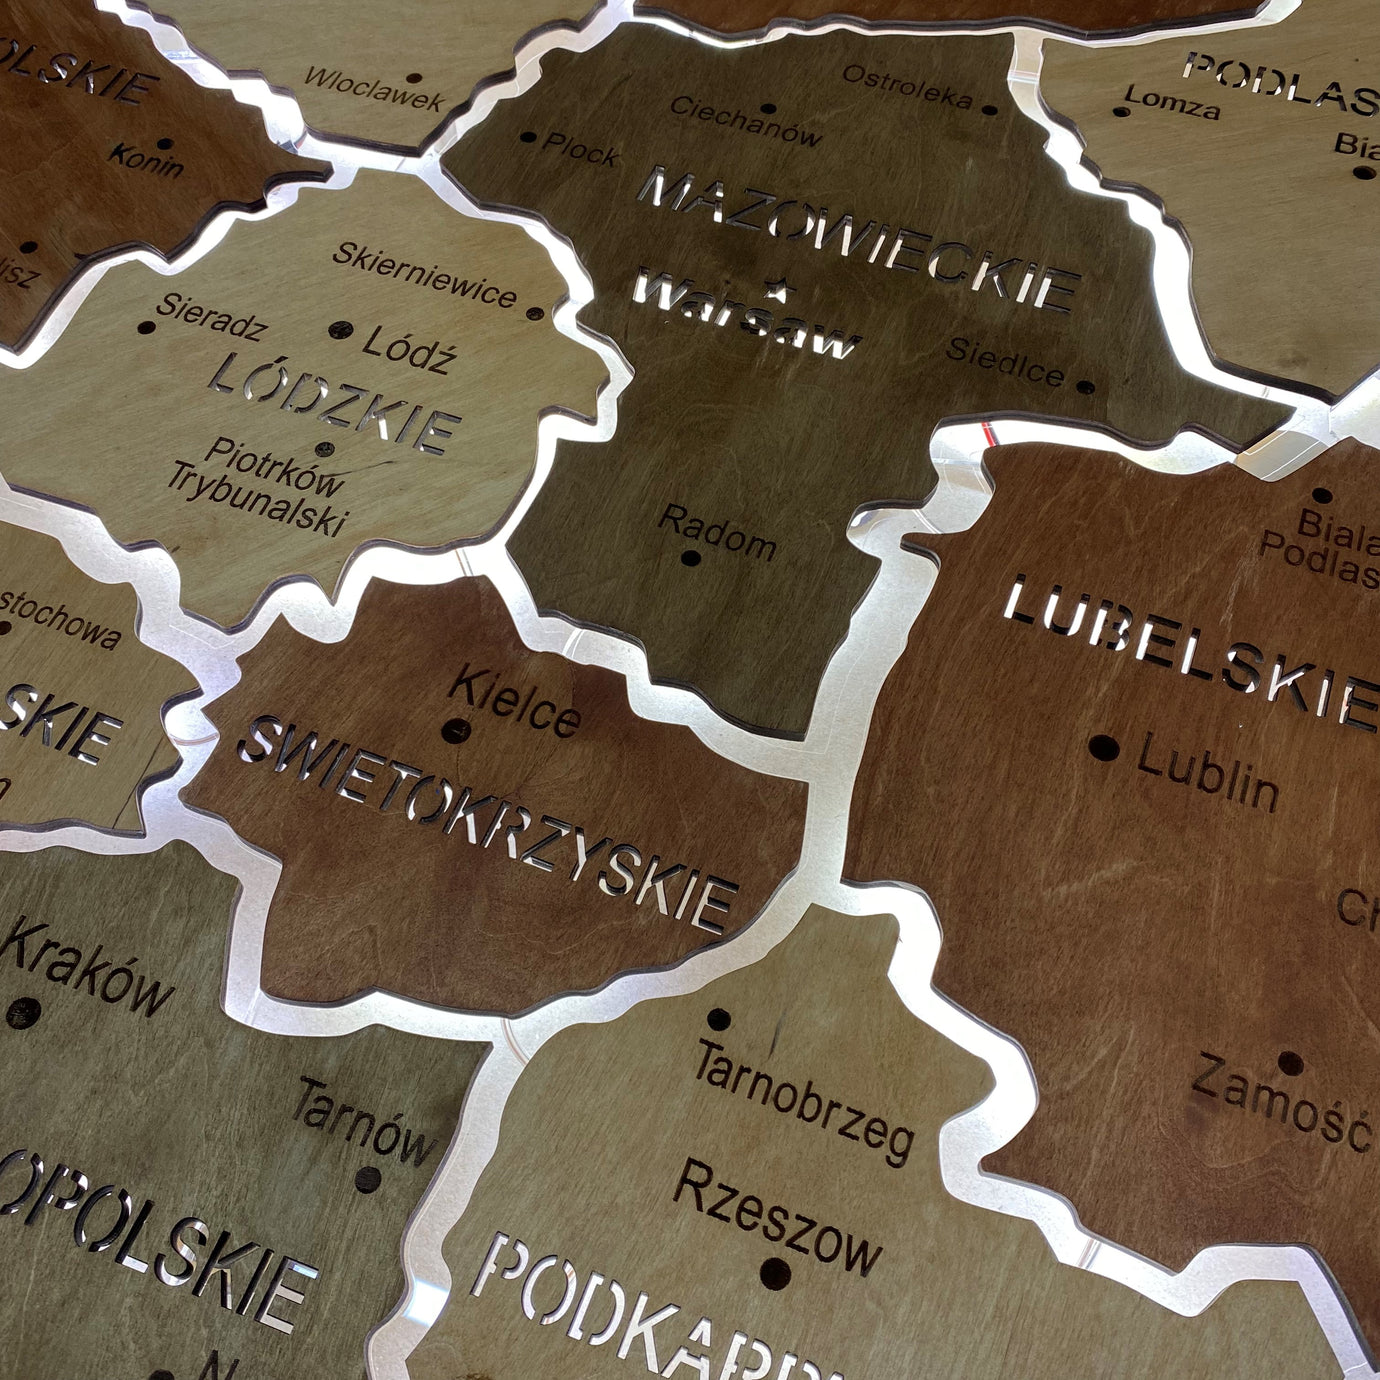 Poland LED map on acrylic glass with backlighting between regions color Soft